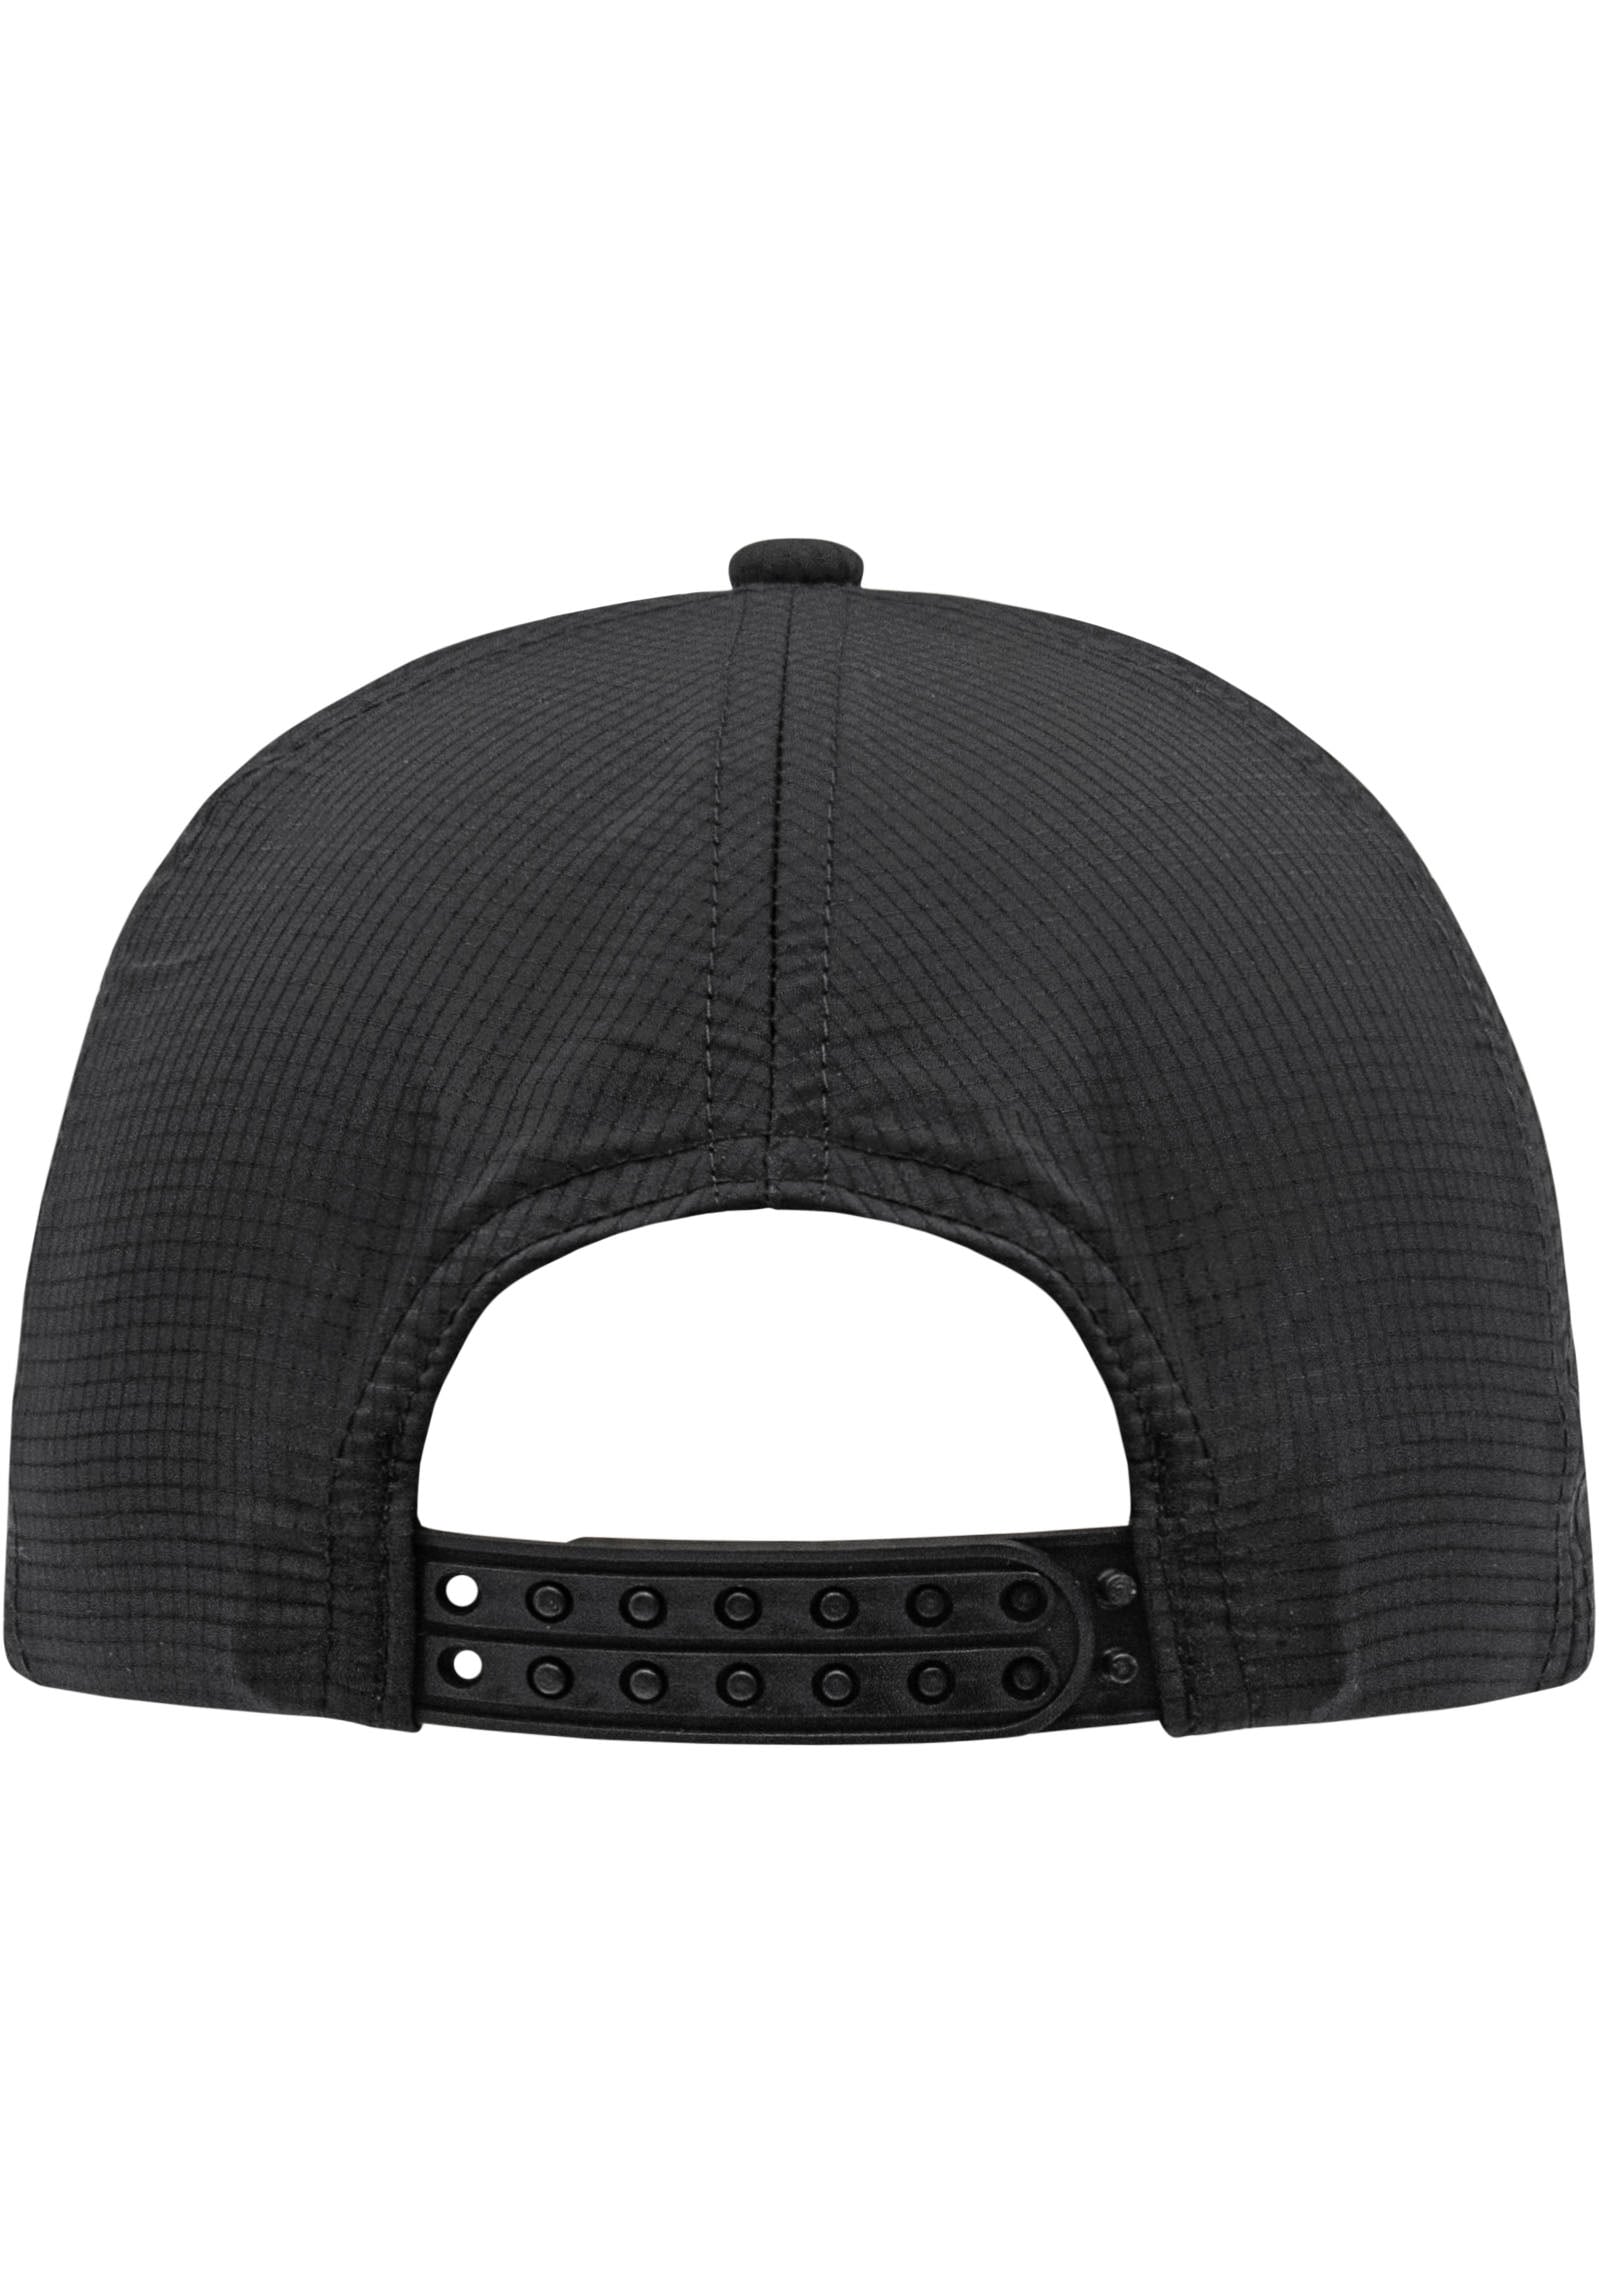 Langley Baseball UNIVERSAL bei Hat online Cap, chillouts